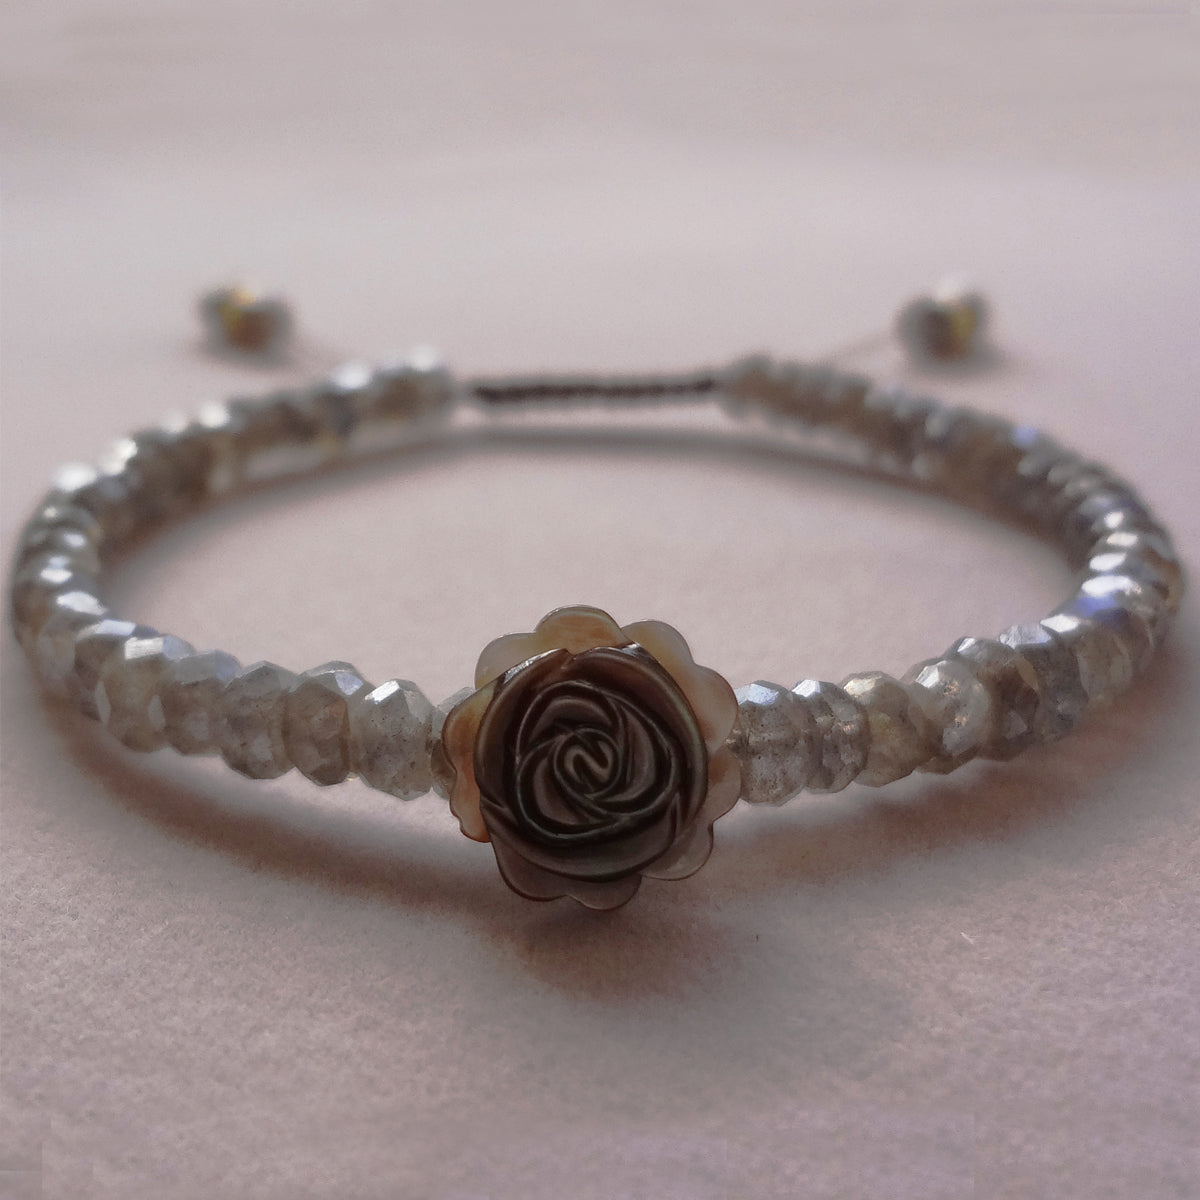 Chocolate Mother of Pearl Rose and Labradorites Bracelet